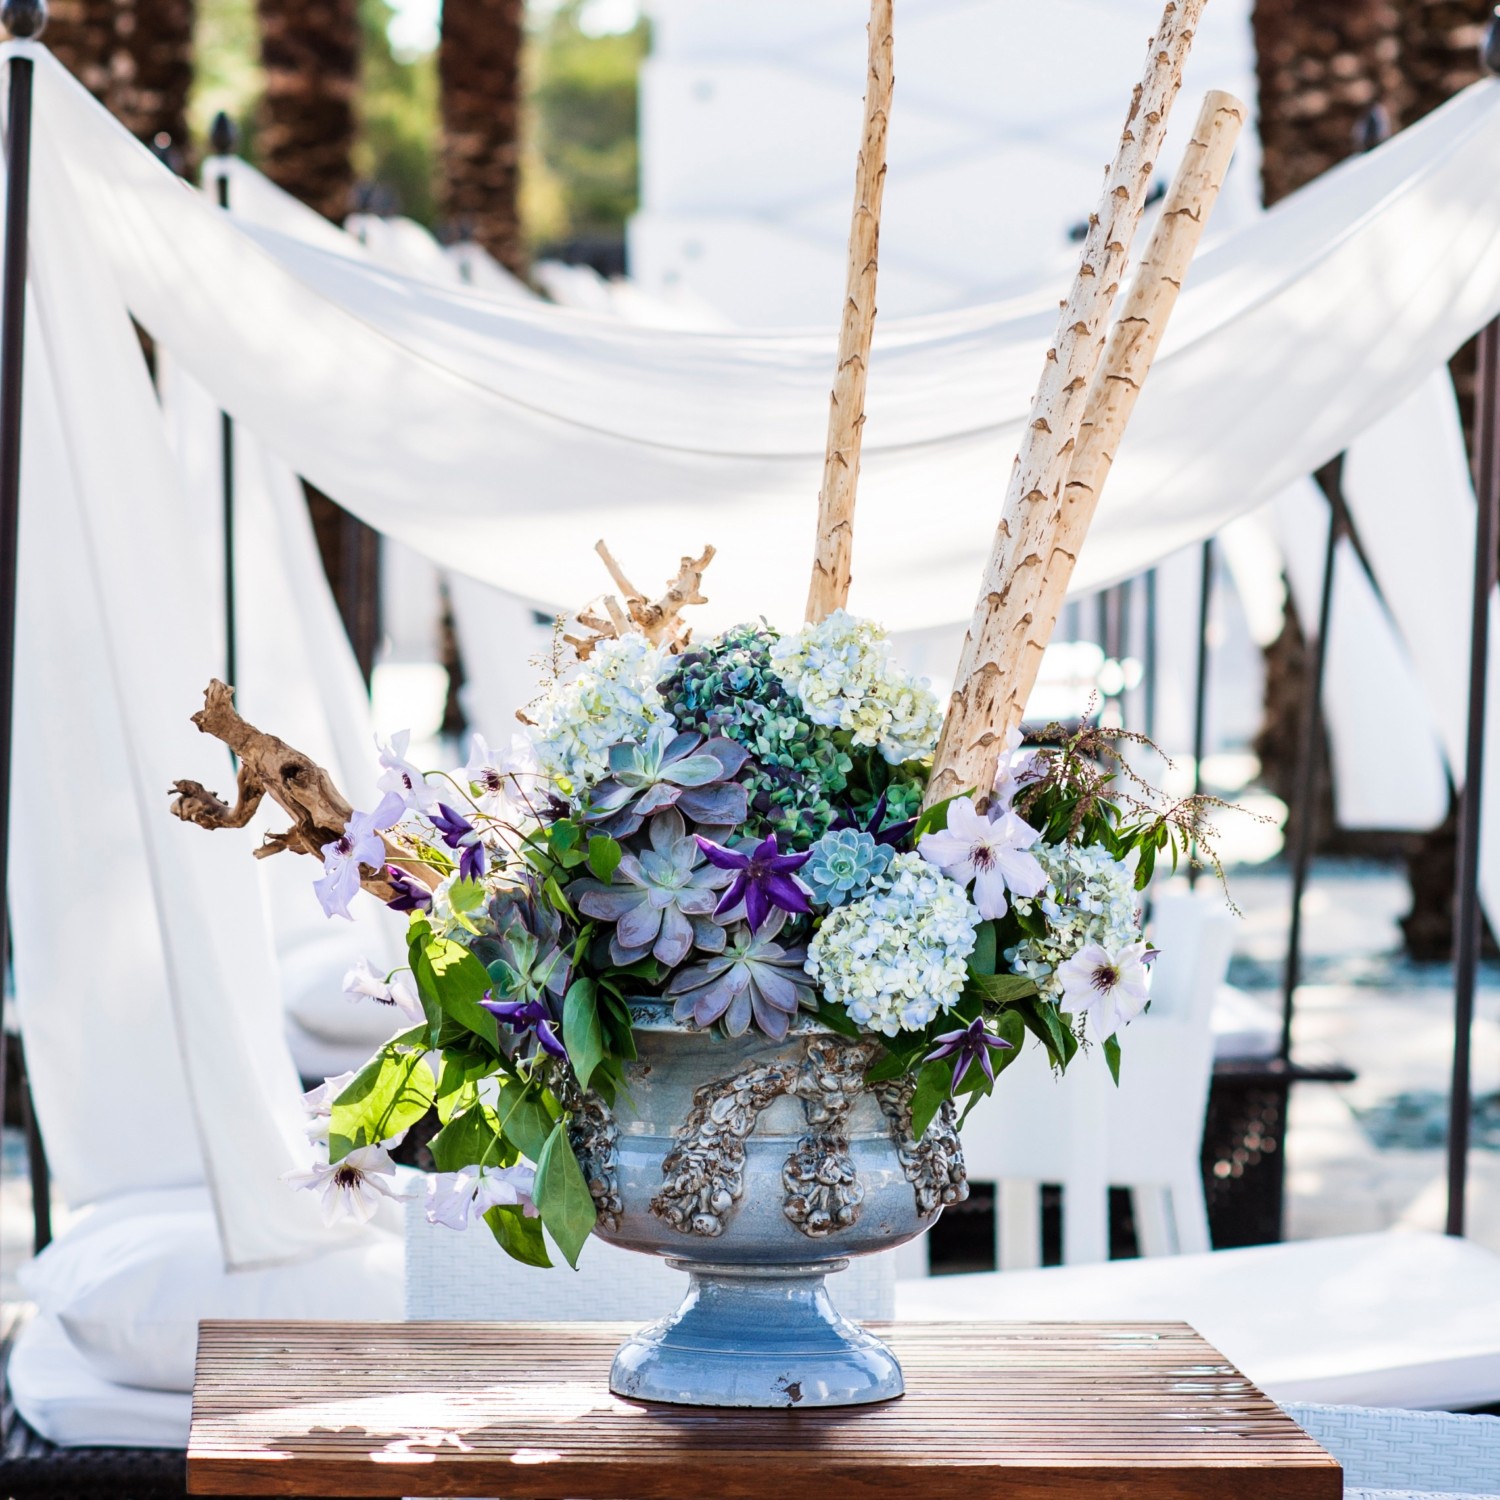 A symphony of blue flowers, complete with batons, is set in a bower of palms and breezy white linen.